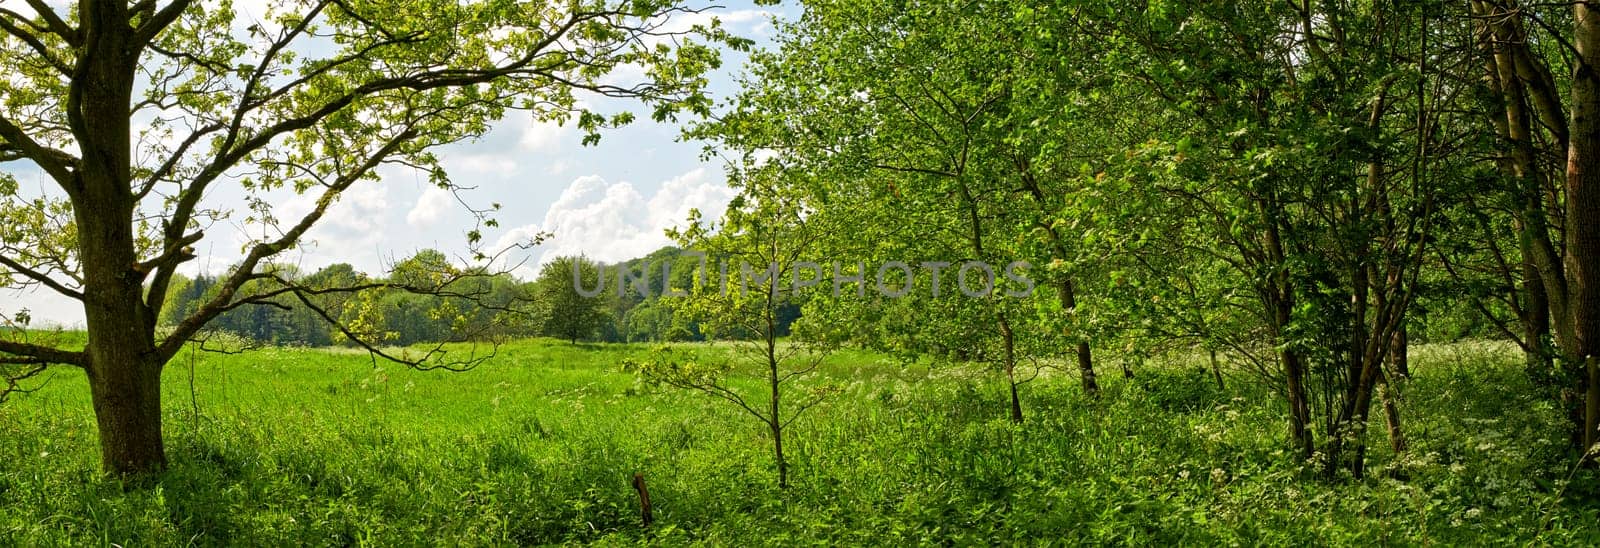 Forest, grass and woods in nature or environment with landscape, greenery and conservation for travel. Trees, ecosystem and field with plants in summer for adventure, explore and hiking in Denmark.